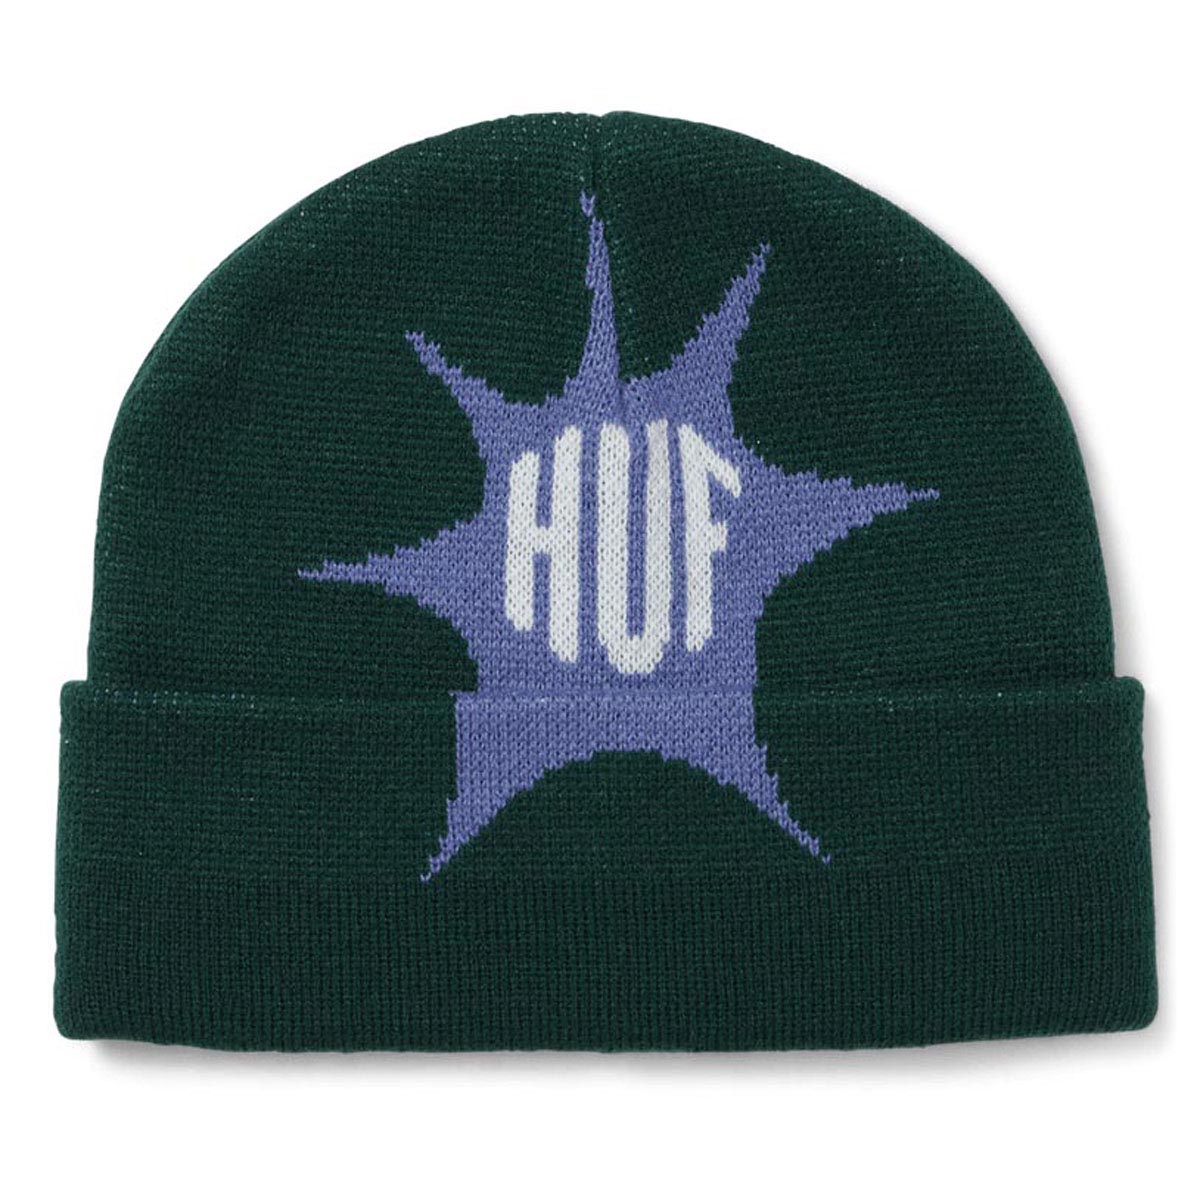 HUF Impact Beanie - Forest Green image 1